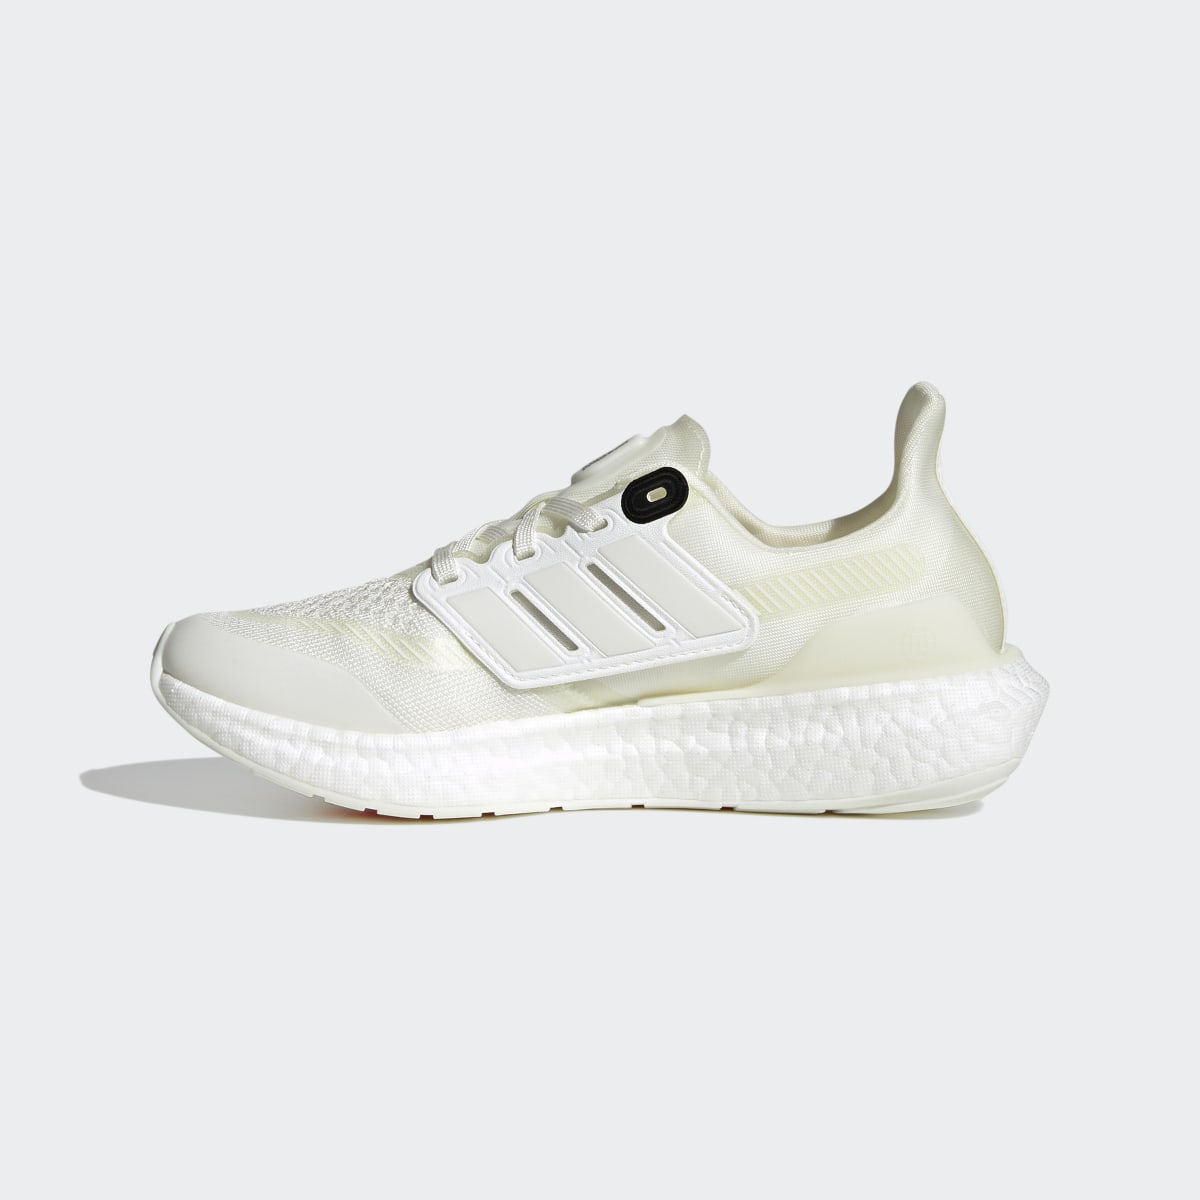 Adidas Chaussure Ultraboost Made to Be Remade 2.0. 10